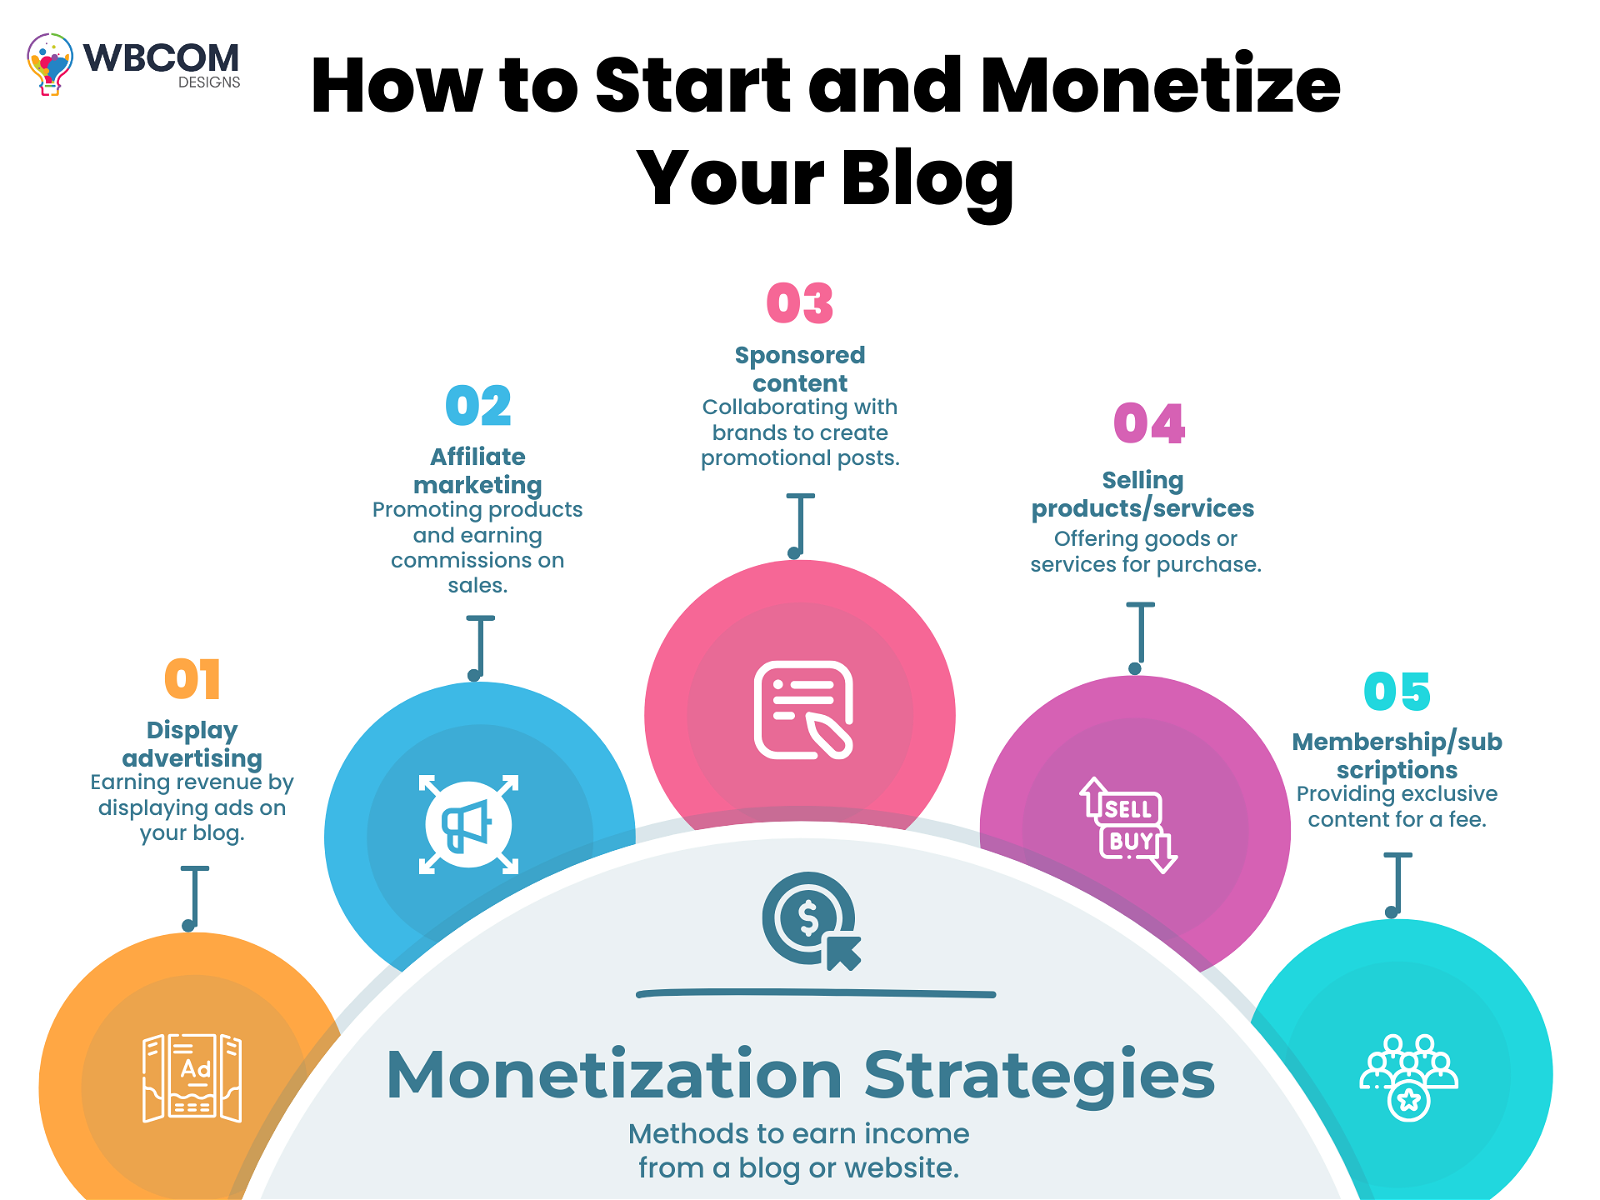 How to Start and Monetize Your Blog